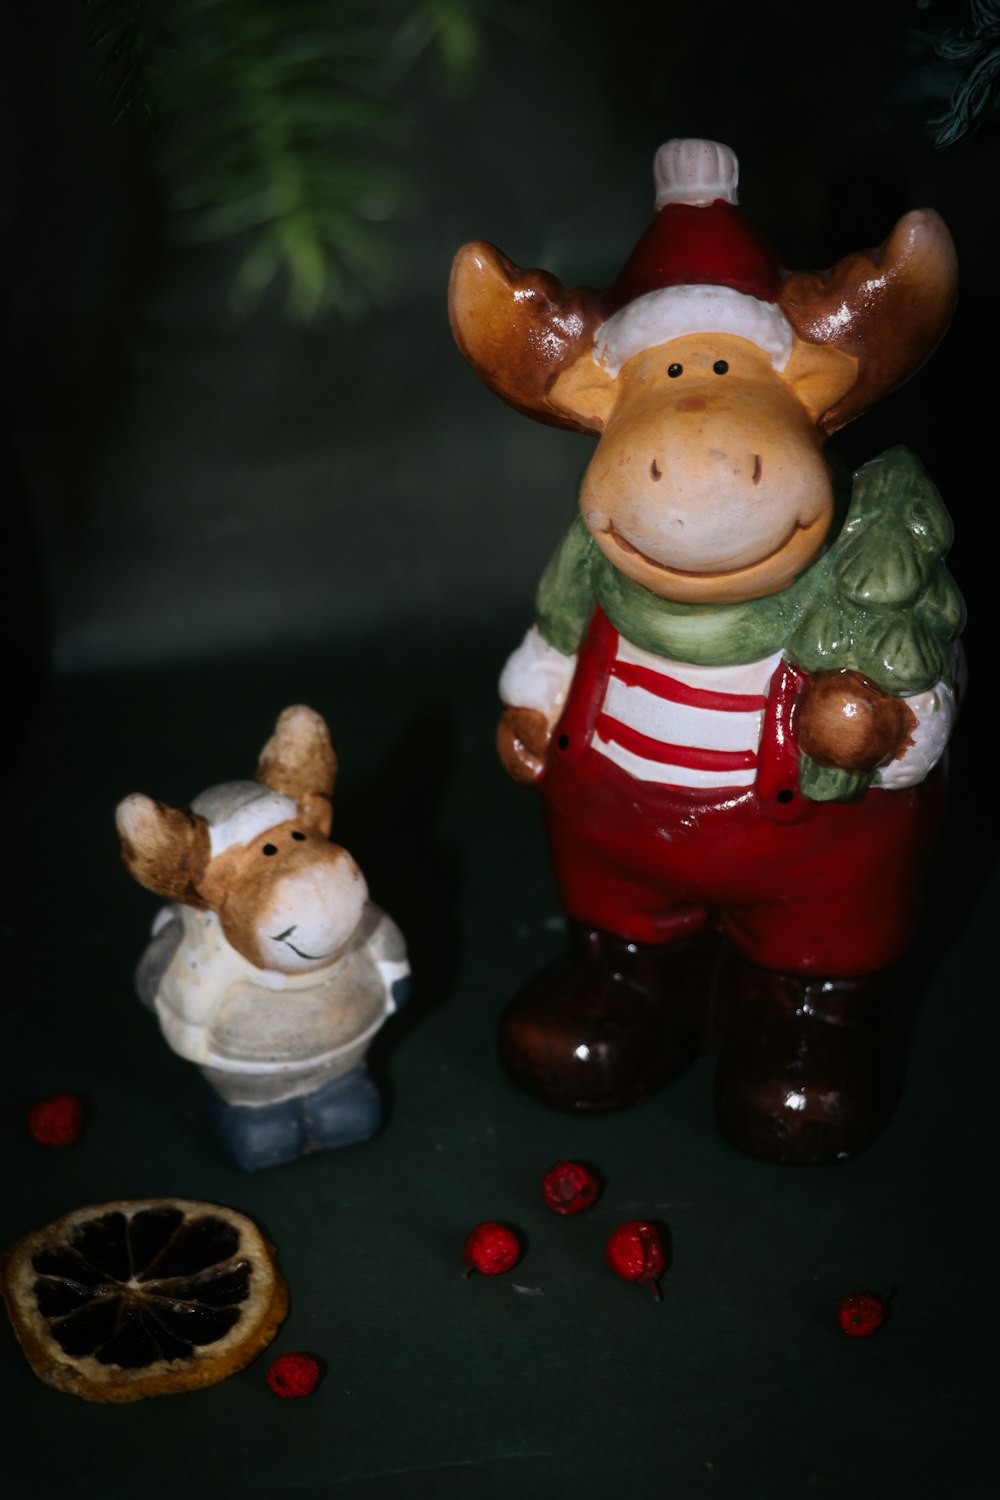 a ceramic figurine of a moose and a mouse